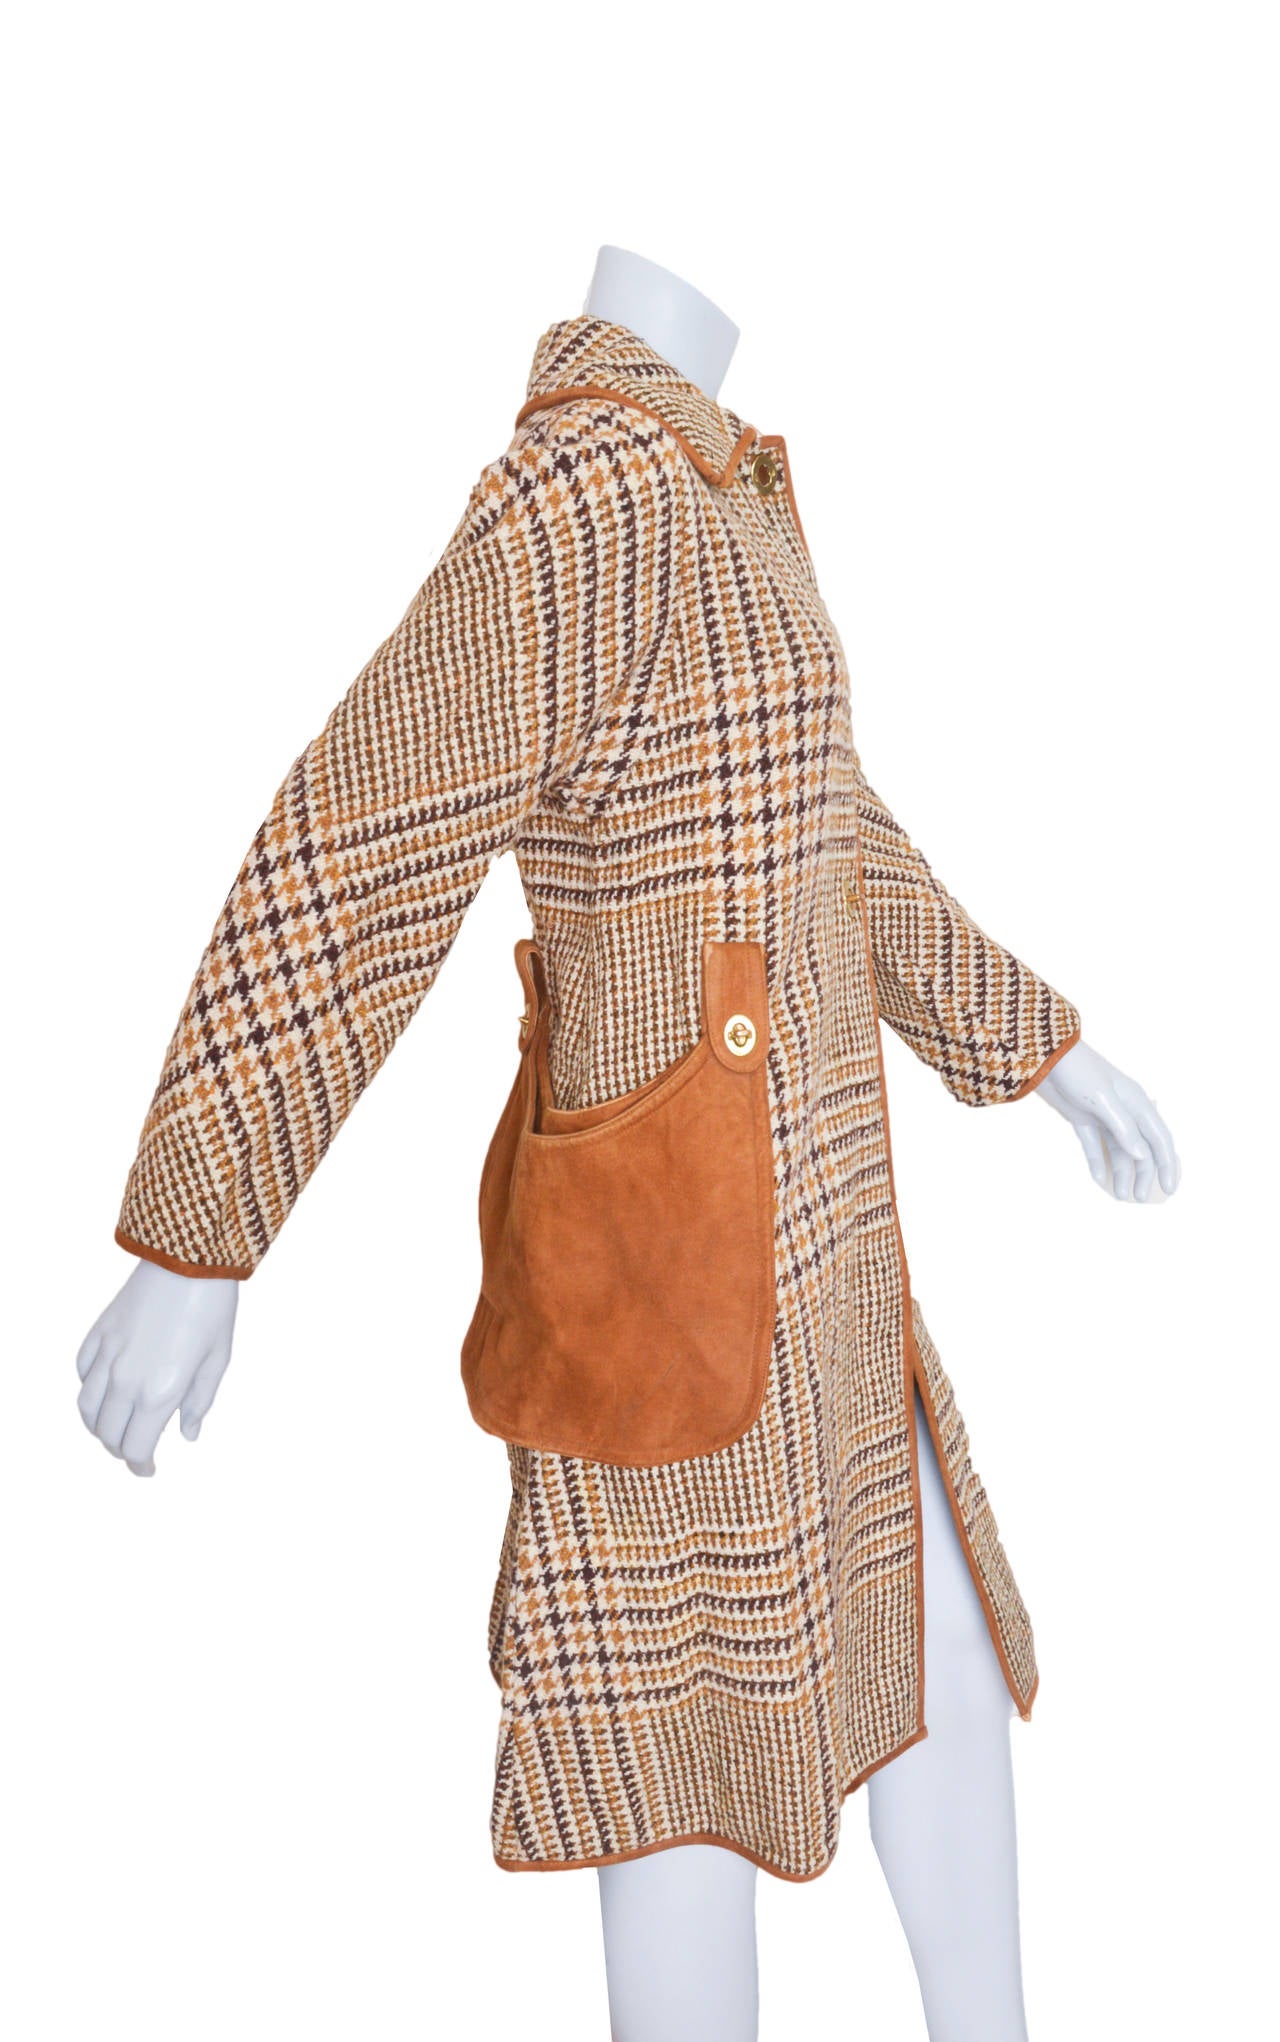 Classic Bonnie Cashin wool tweed coat.
Trimmed in tan suede leather.
Underside of collar is suede.
Brass grommeted button holes with twist toggle closures
Detachable suede bucket pockets.
Unlined.